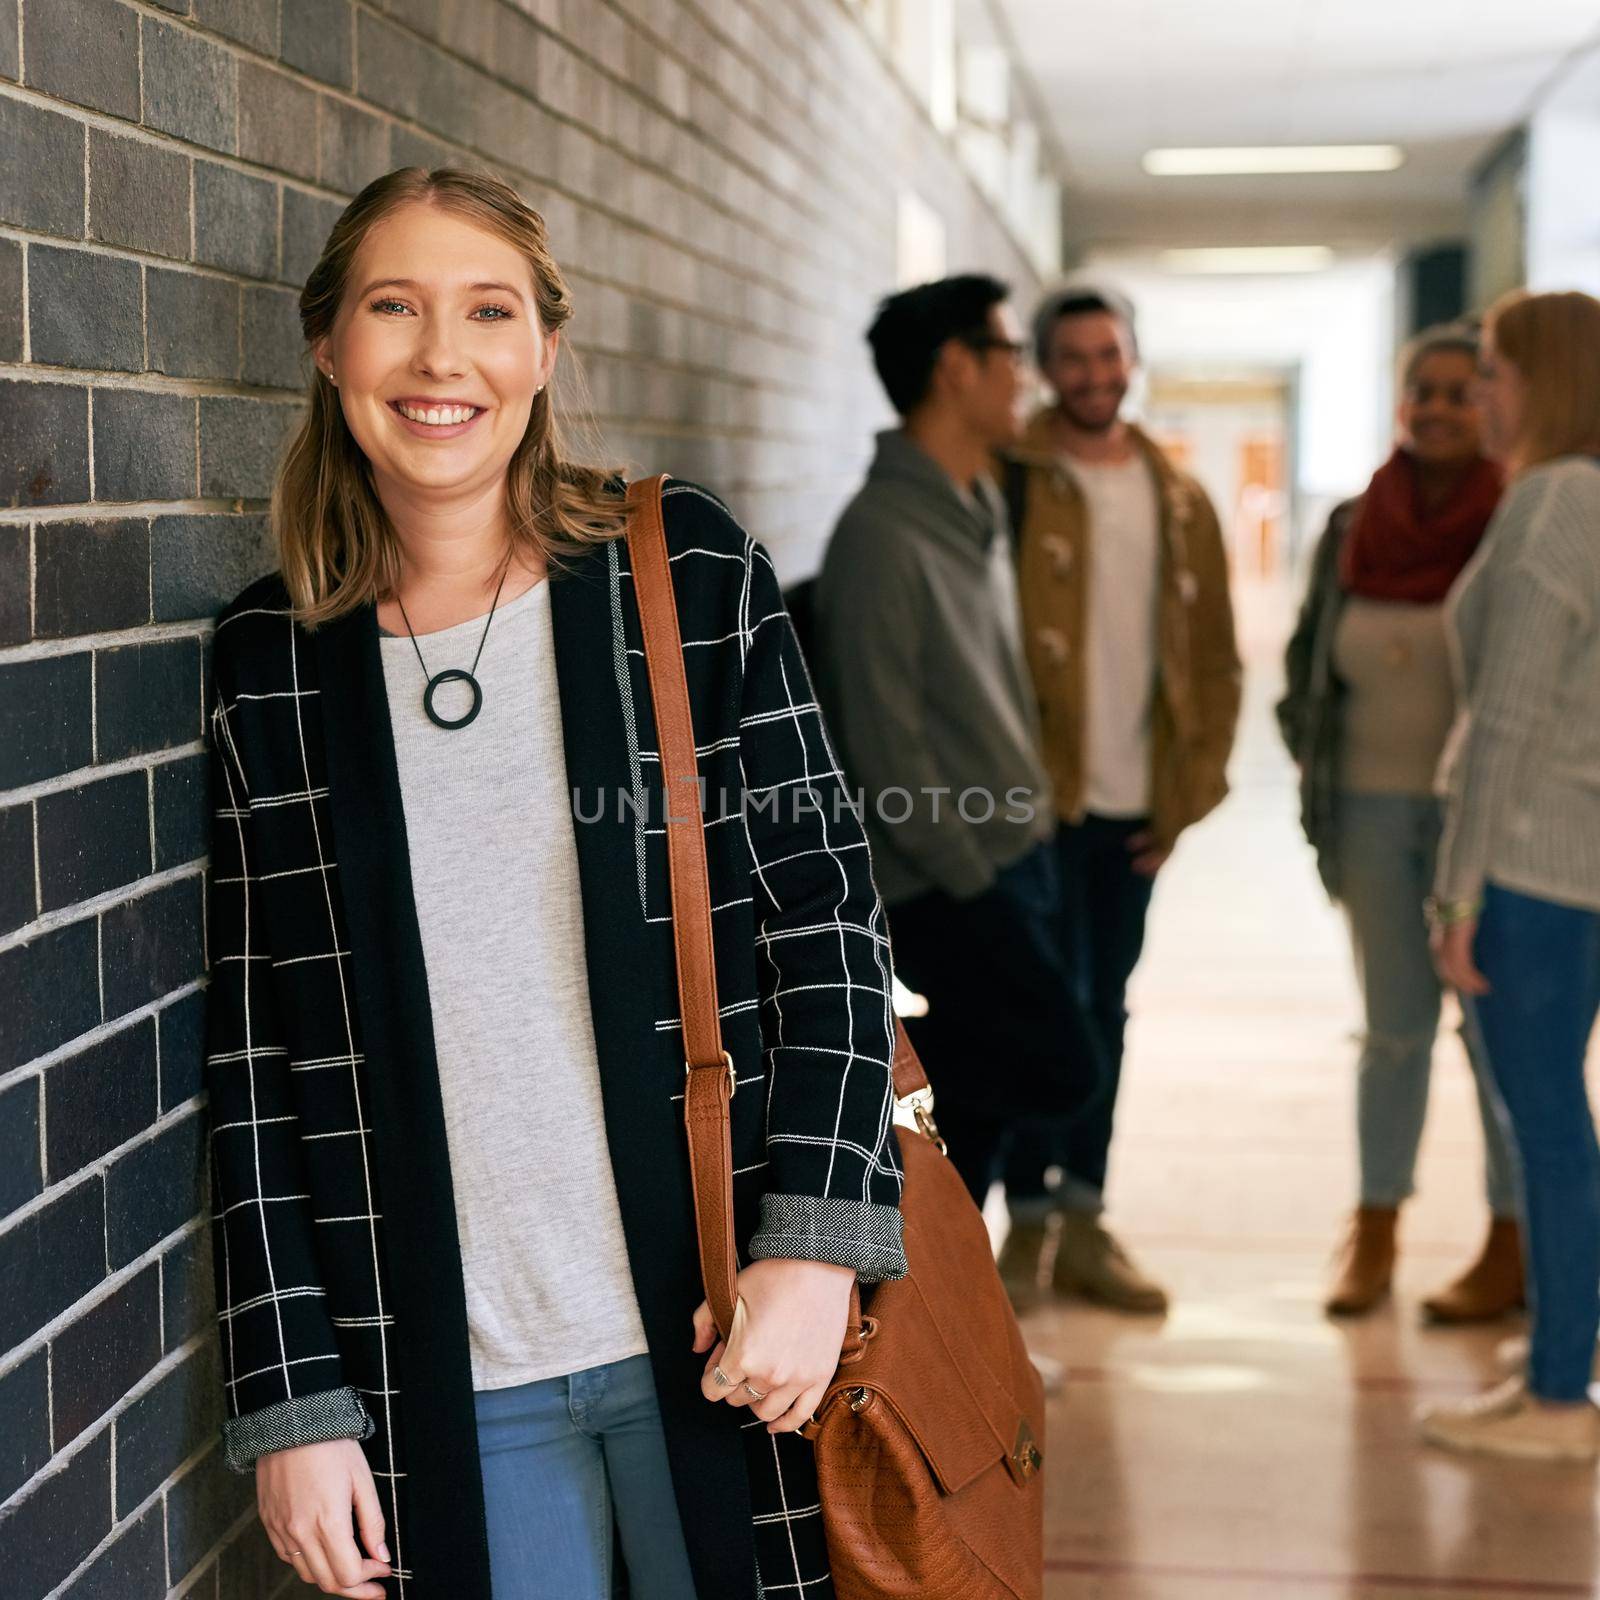 Portrait of a young female university student standing in a campus corridor with her classmates in the background.